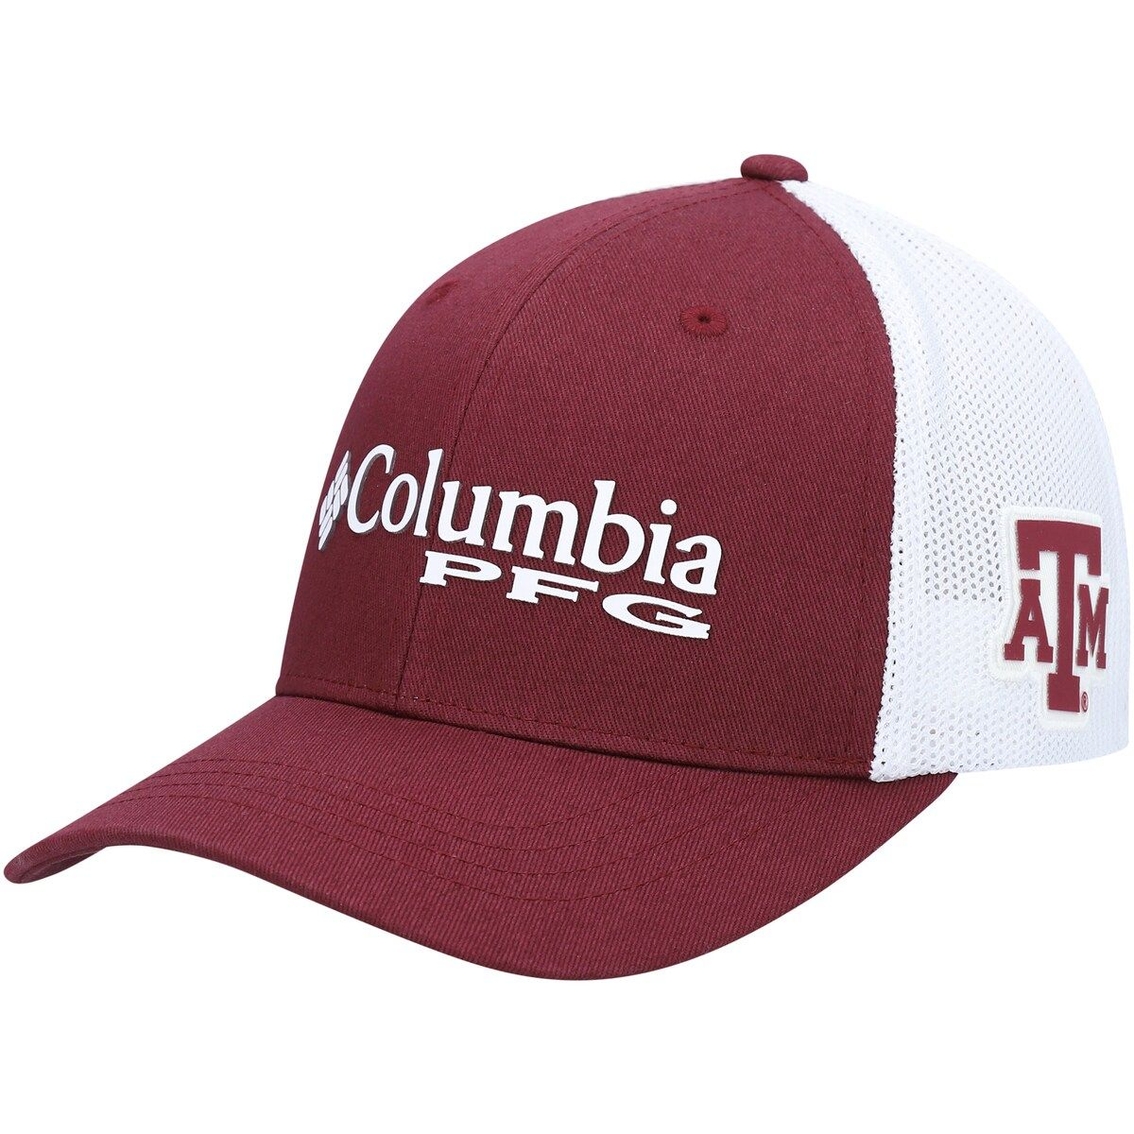 Youth Columbia Maroon Texas A&M Aggies Collegiate PFG Snapback Hat - Image 2 of 4